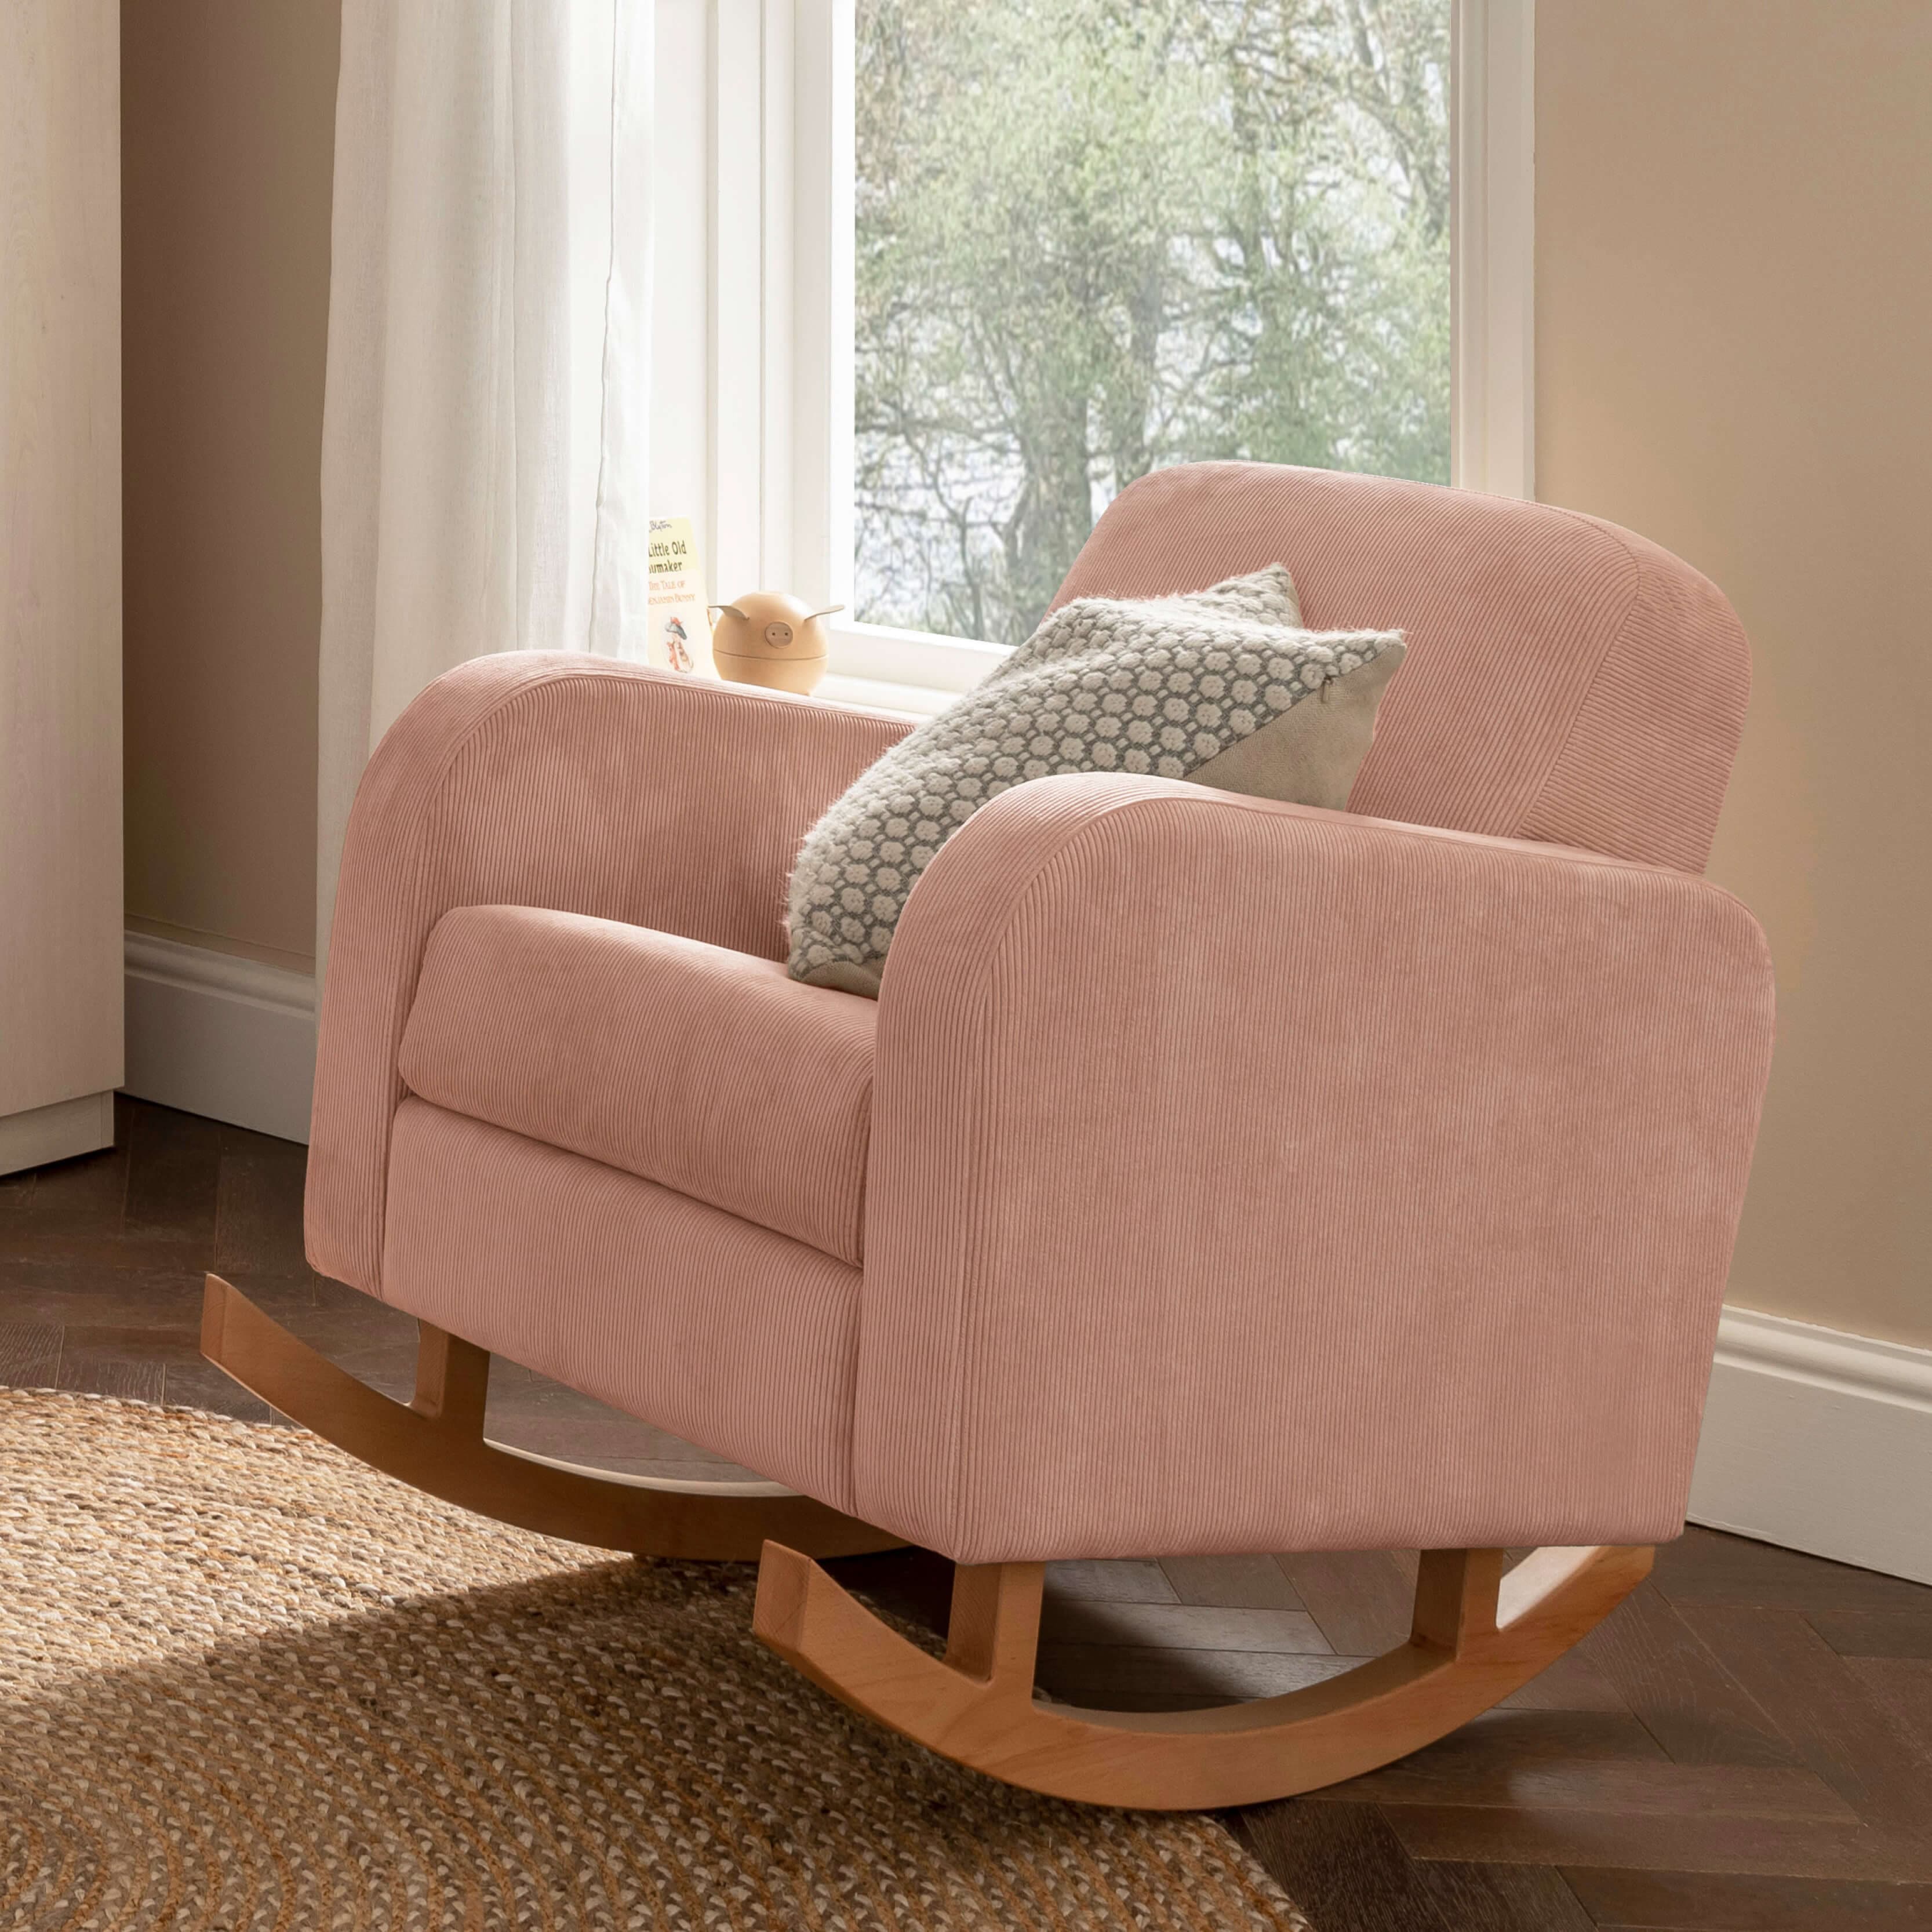 Cuddleco Etta Nursing Chair - Coral - For Your Little One